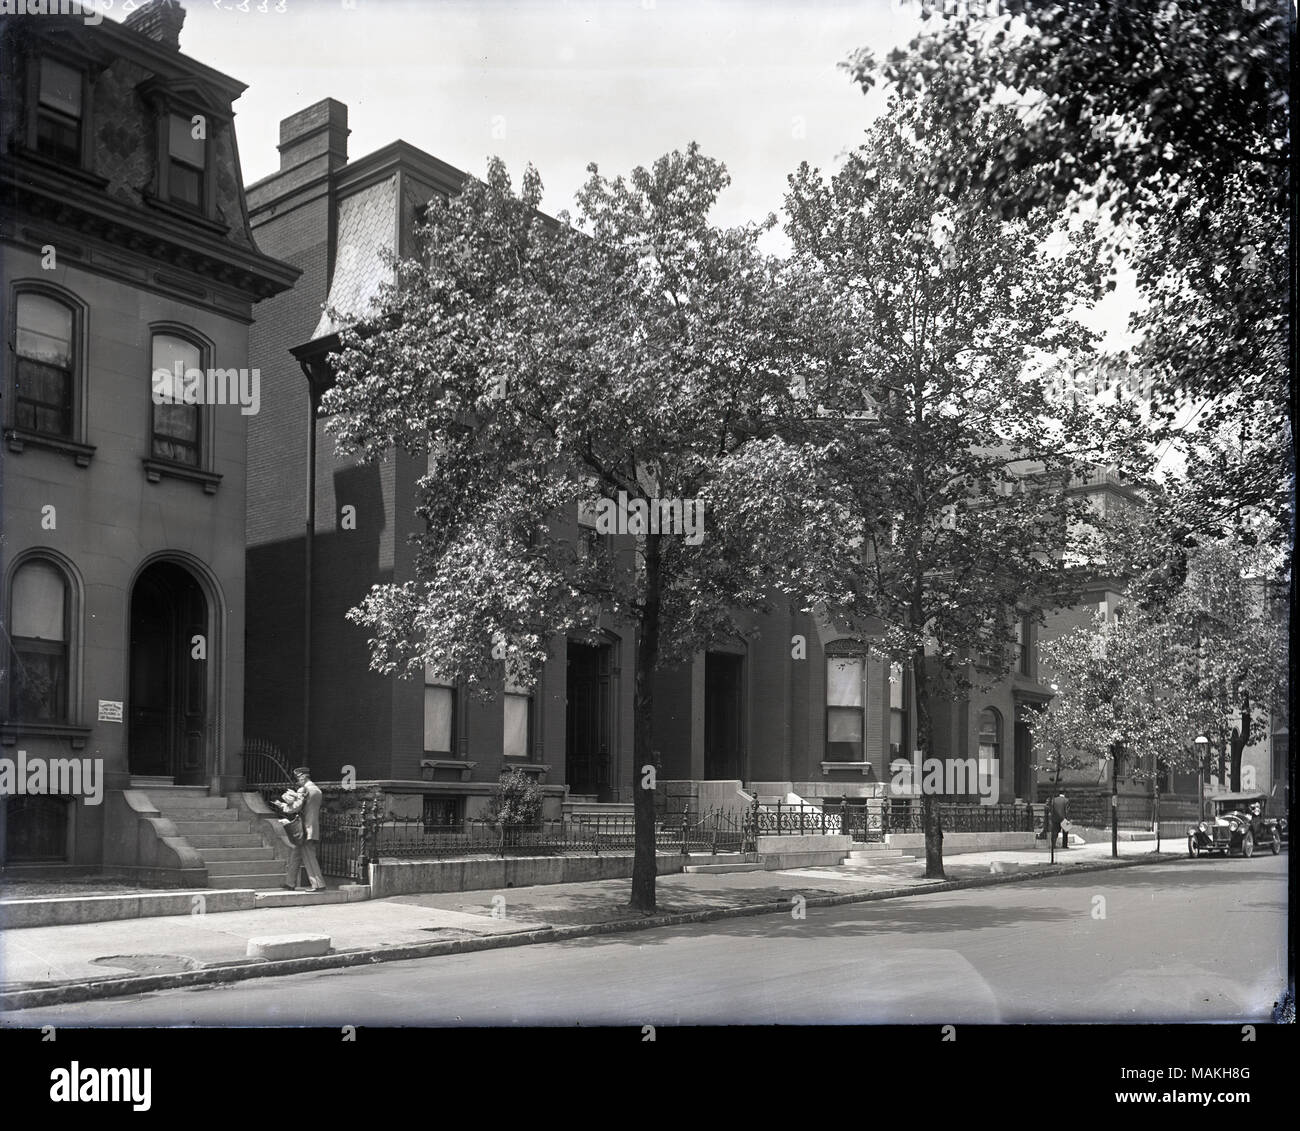 Horizontal, black and white photograph showing a view of three story houses along a tree-lined street. A mailman is delivering mail to the house on the left side of the print, and there is a car parked along the road on the far right side. Title: Street in Lafayette Square.  . 1908. Holt, Charles Clement, 1866-1925 Stock Photo